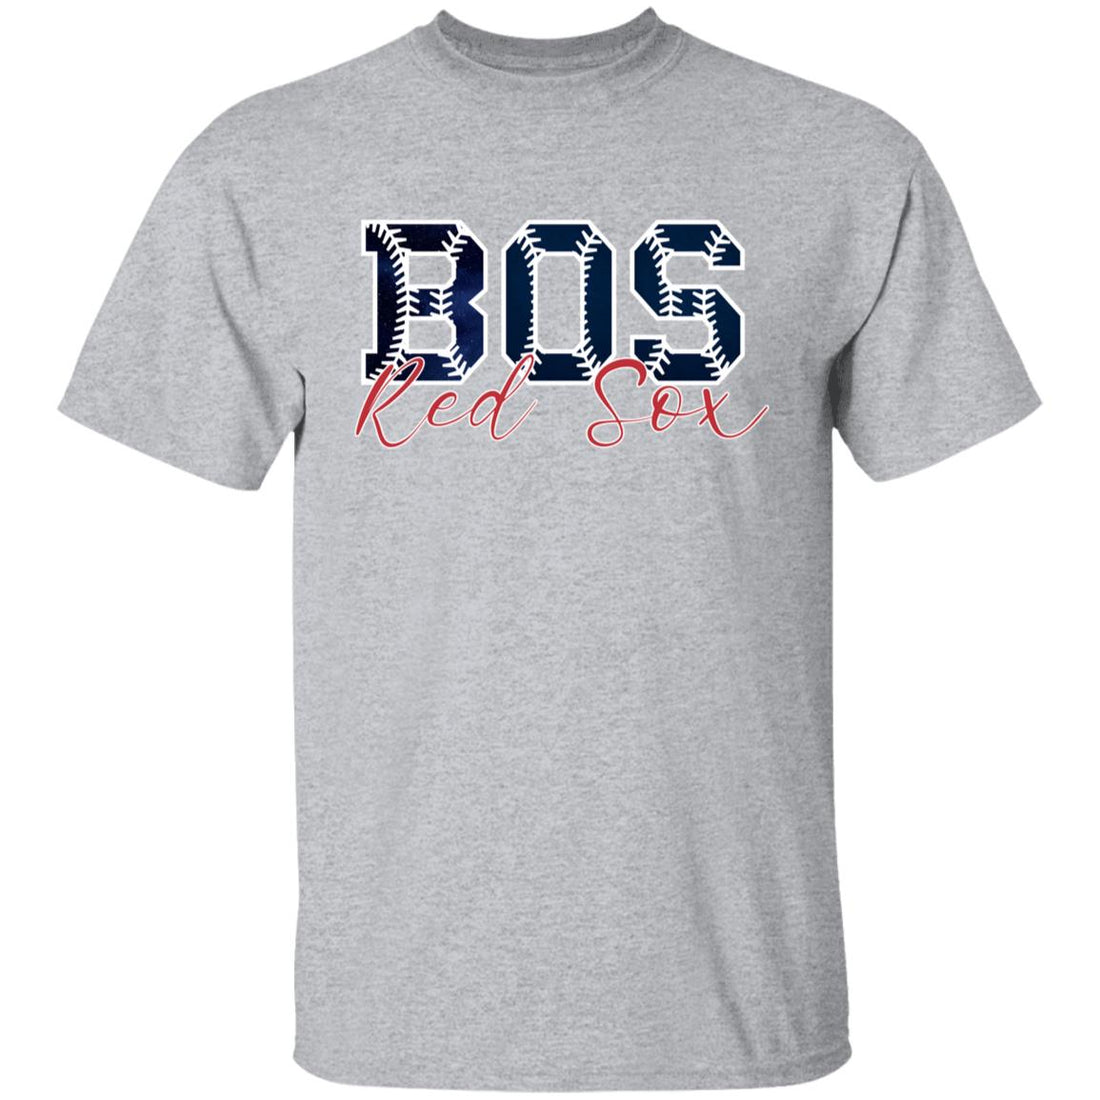 BOS Red Sox Youth T-Shirt - T-Shirts - Positively Sassy - BOS Red Sox Youth T-Shirt